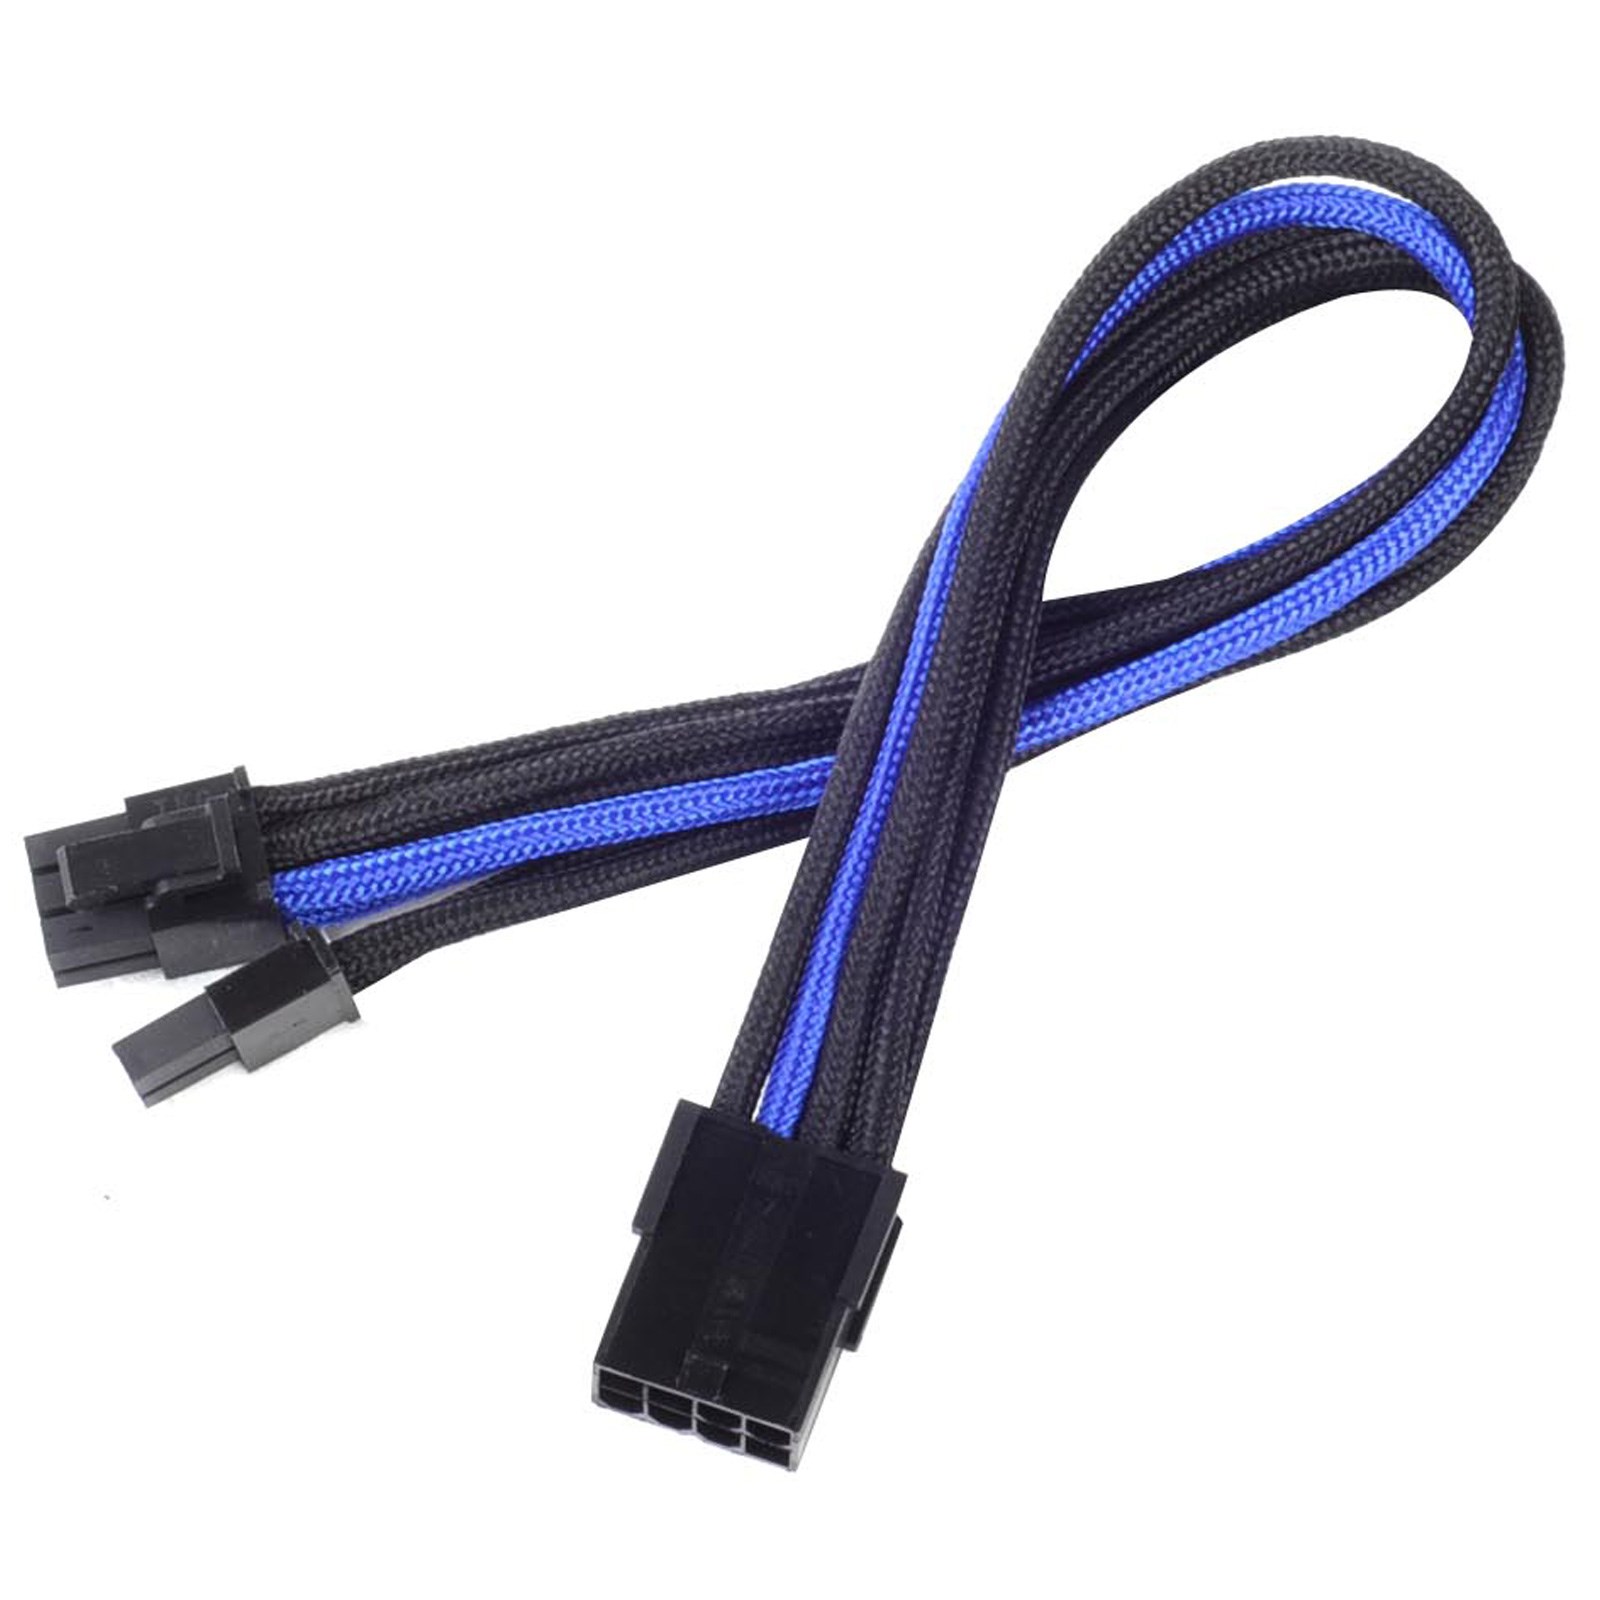 Photos - Cable (video, audio, USB) SilverStone PP07-PCIBA 8-pin PCIe 250mm Extension Cable Sleeved in SST-PP0 